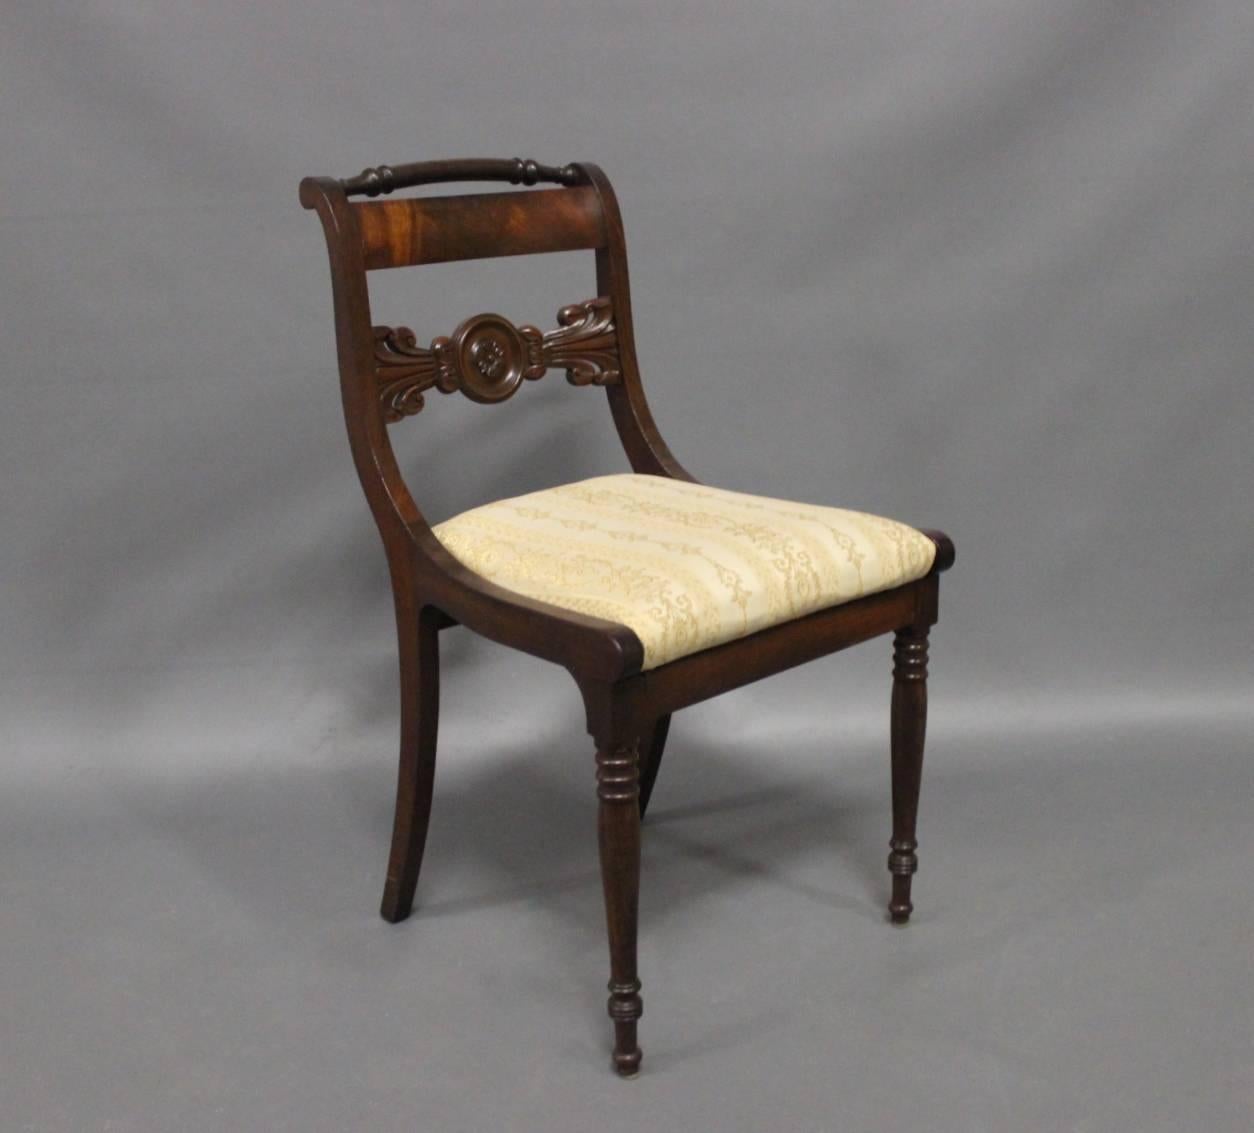 A set of nine antique chairs in the style of late Empire from circa 1840. The chairs are of hand polished mahogany and with seats of light fabric.